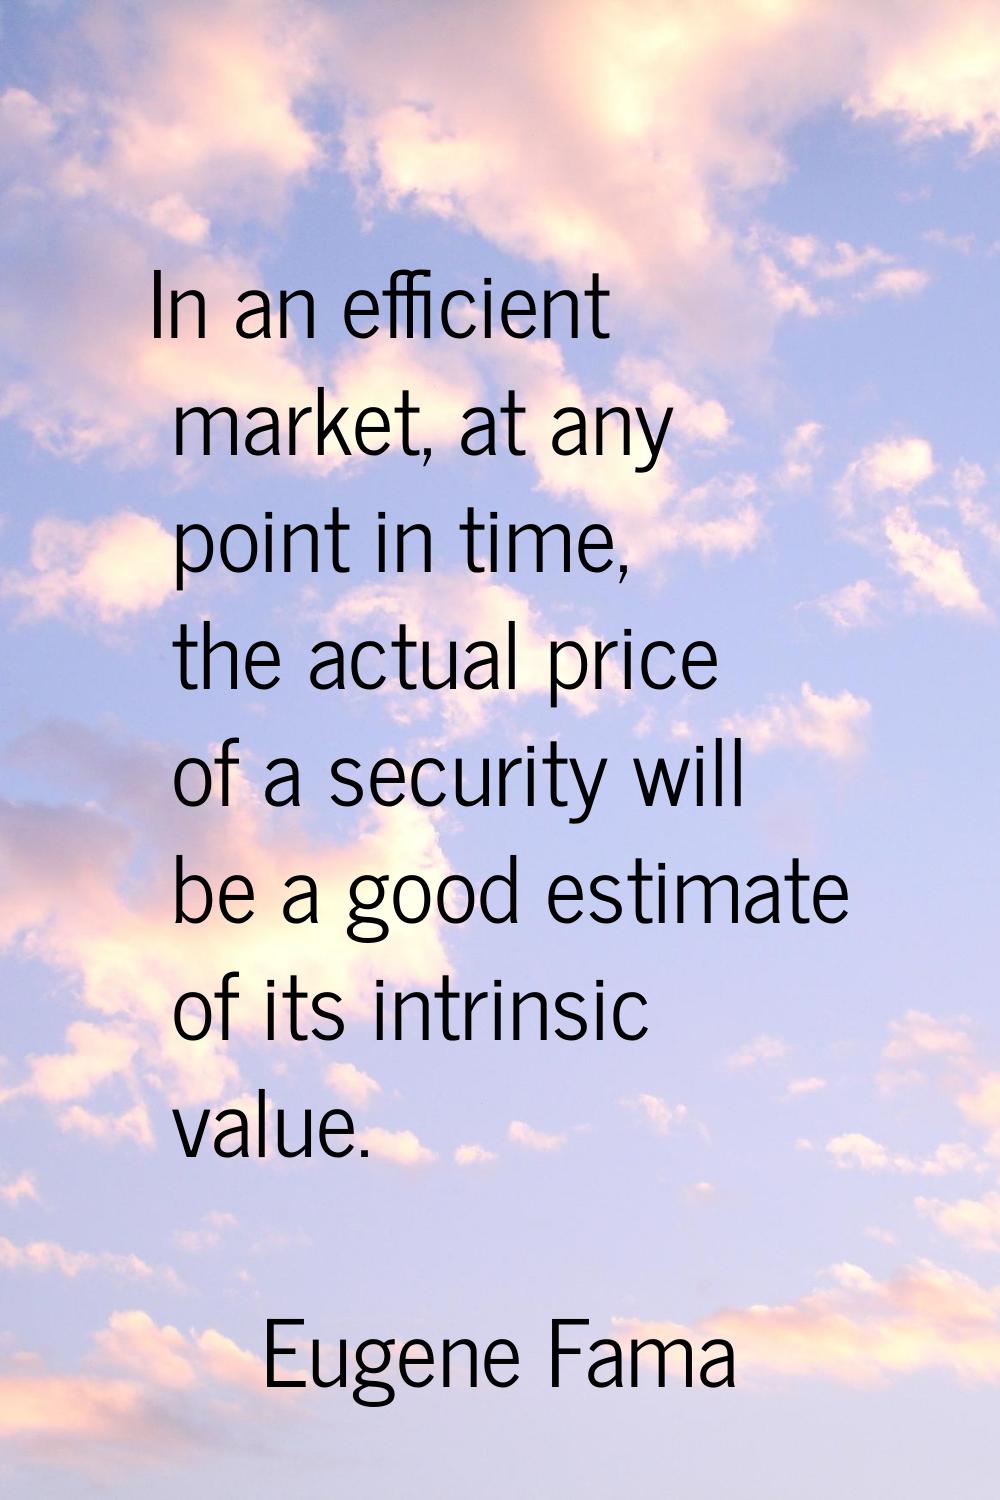 In an efficient market, at any point in time, the actual price of a security will be a good estimat